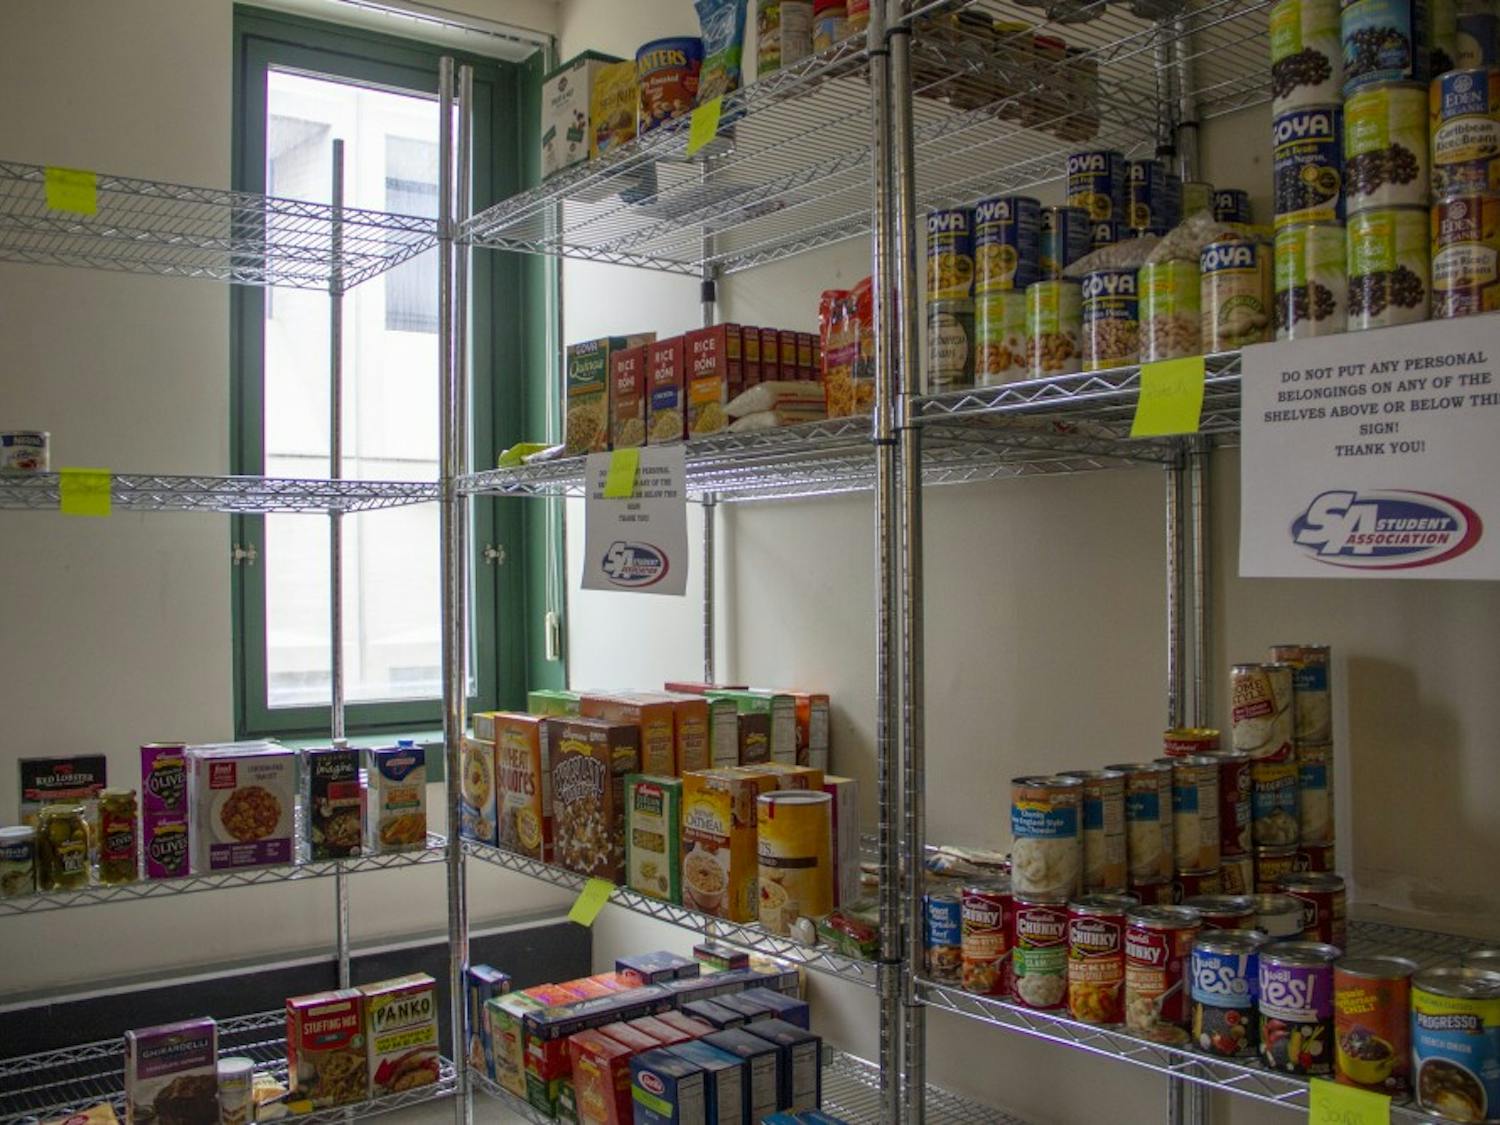 UB’s food pantry is stocked and ready for the pilot program to begin. The pantry will open within the next two weeks, according to Sherri Darrow, director of Health Promotion.